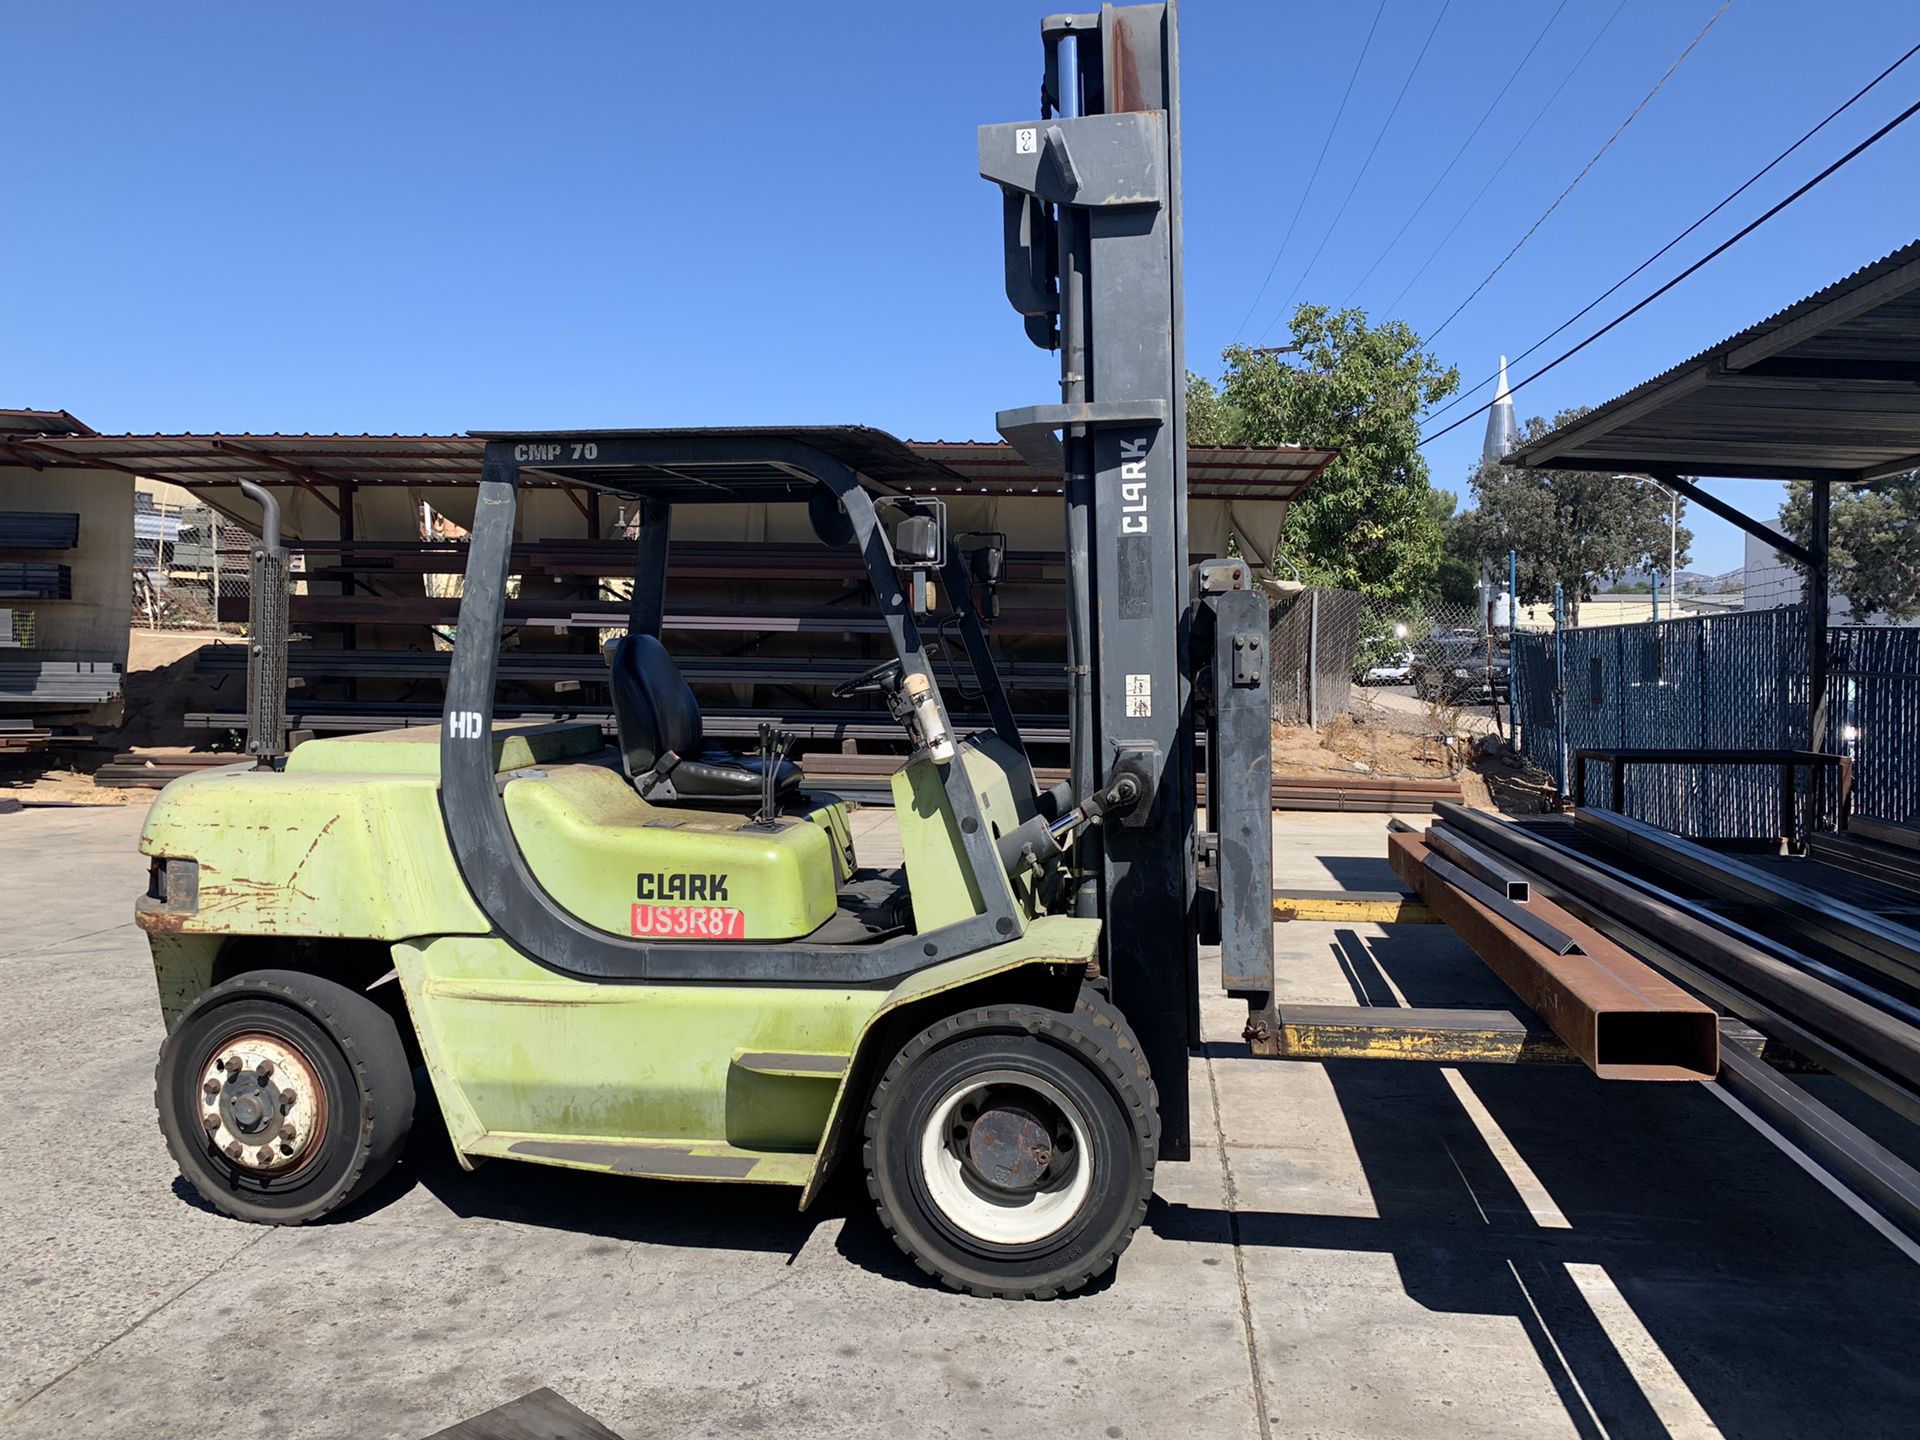 Clark forklift year 2000 15000 lbs